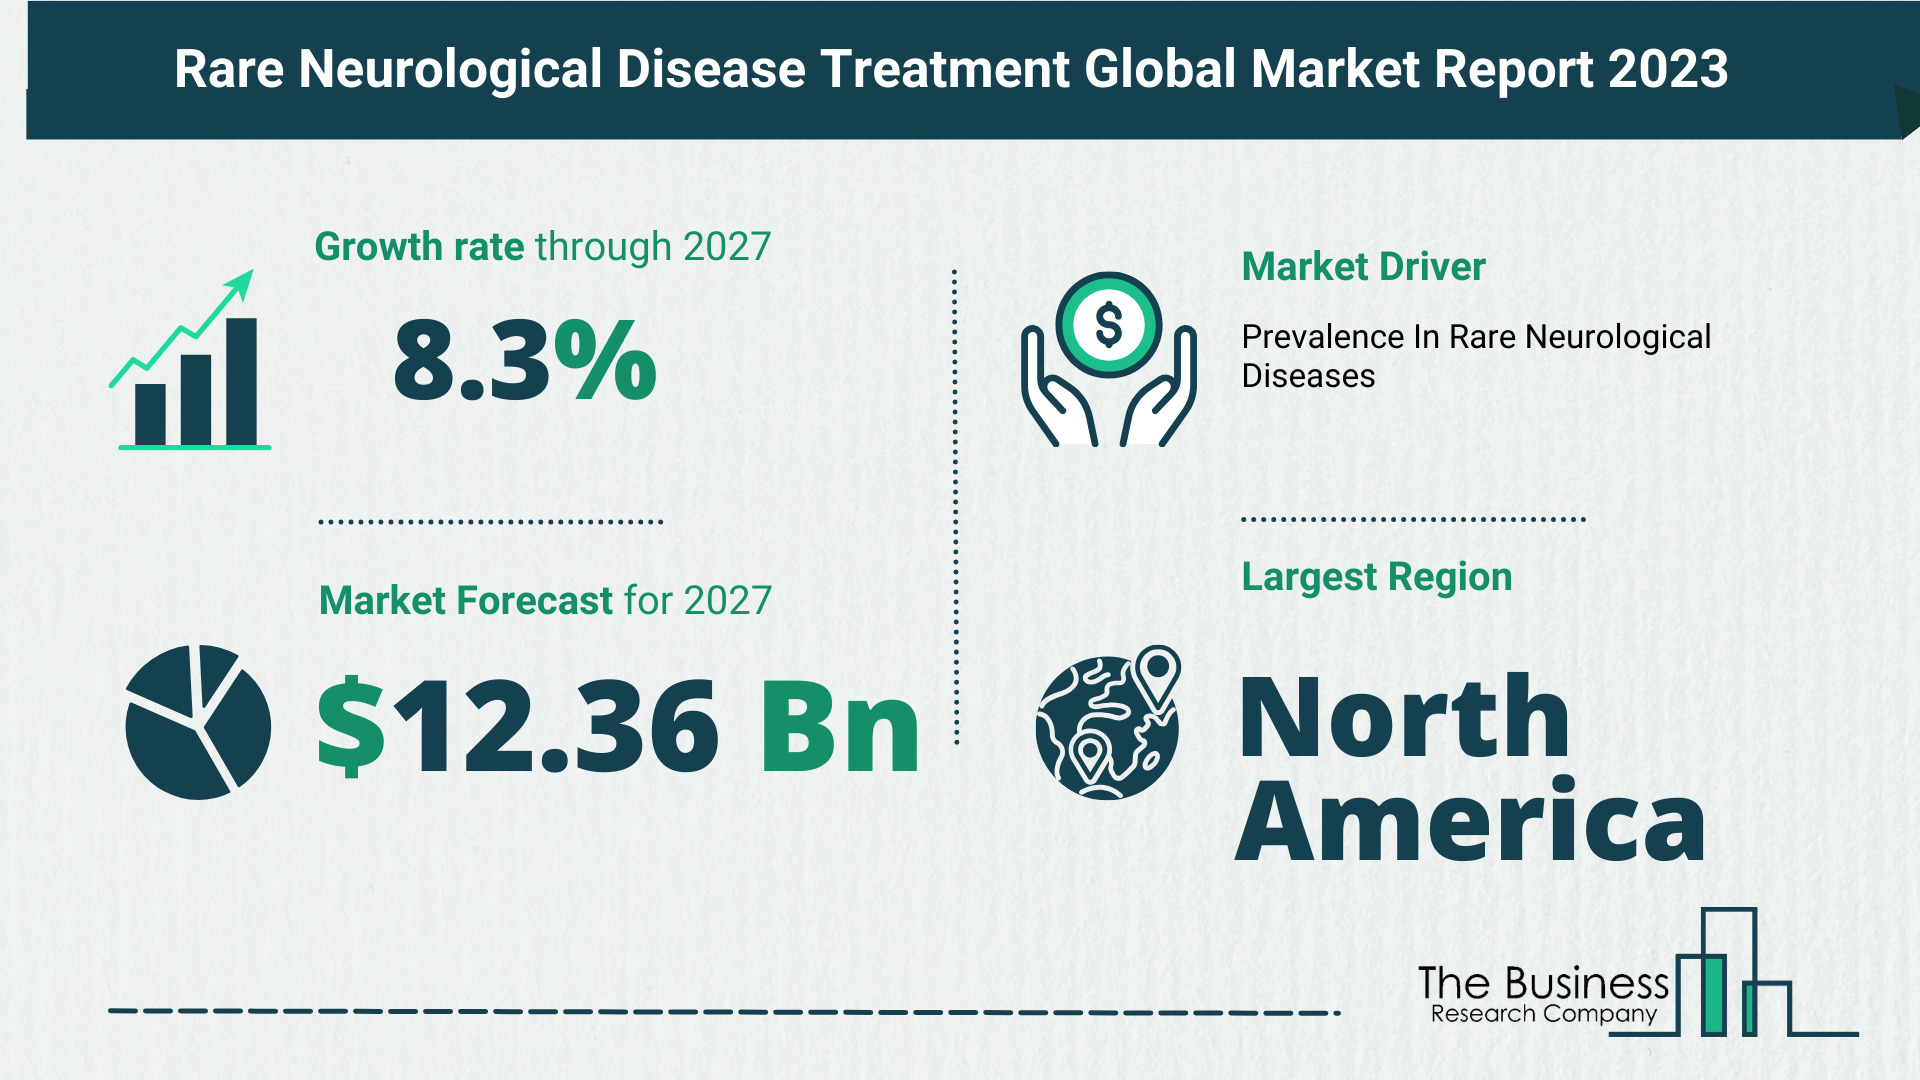 Understand How The Rare Neurological Disease Treatment Market Is Poised To Grow Through 2023-2032